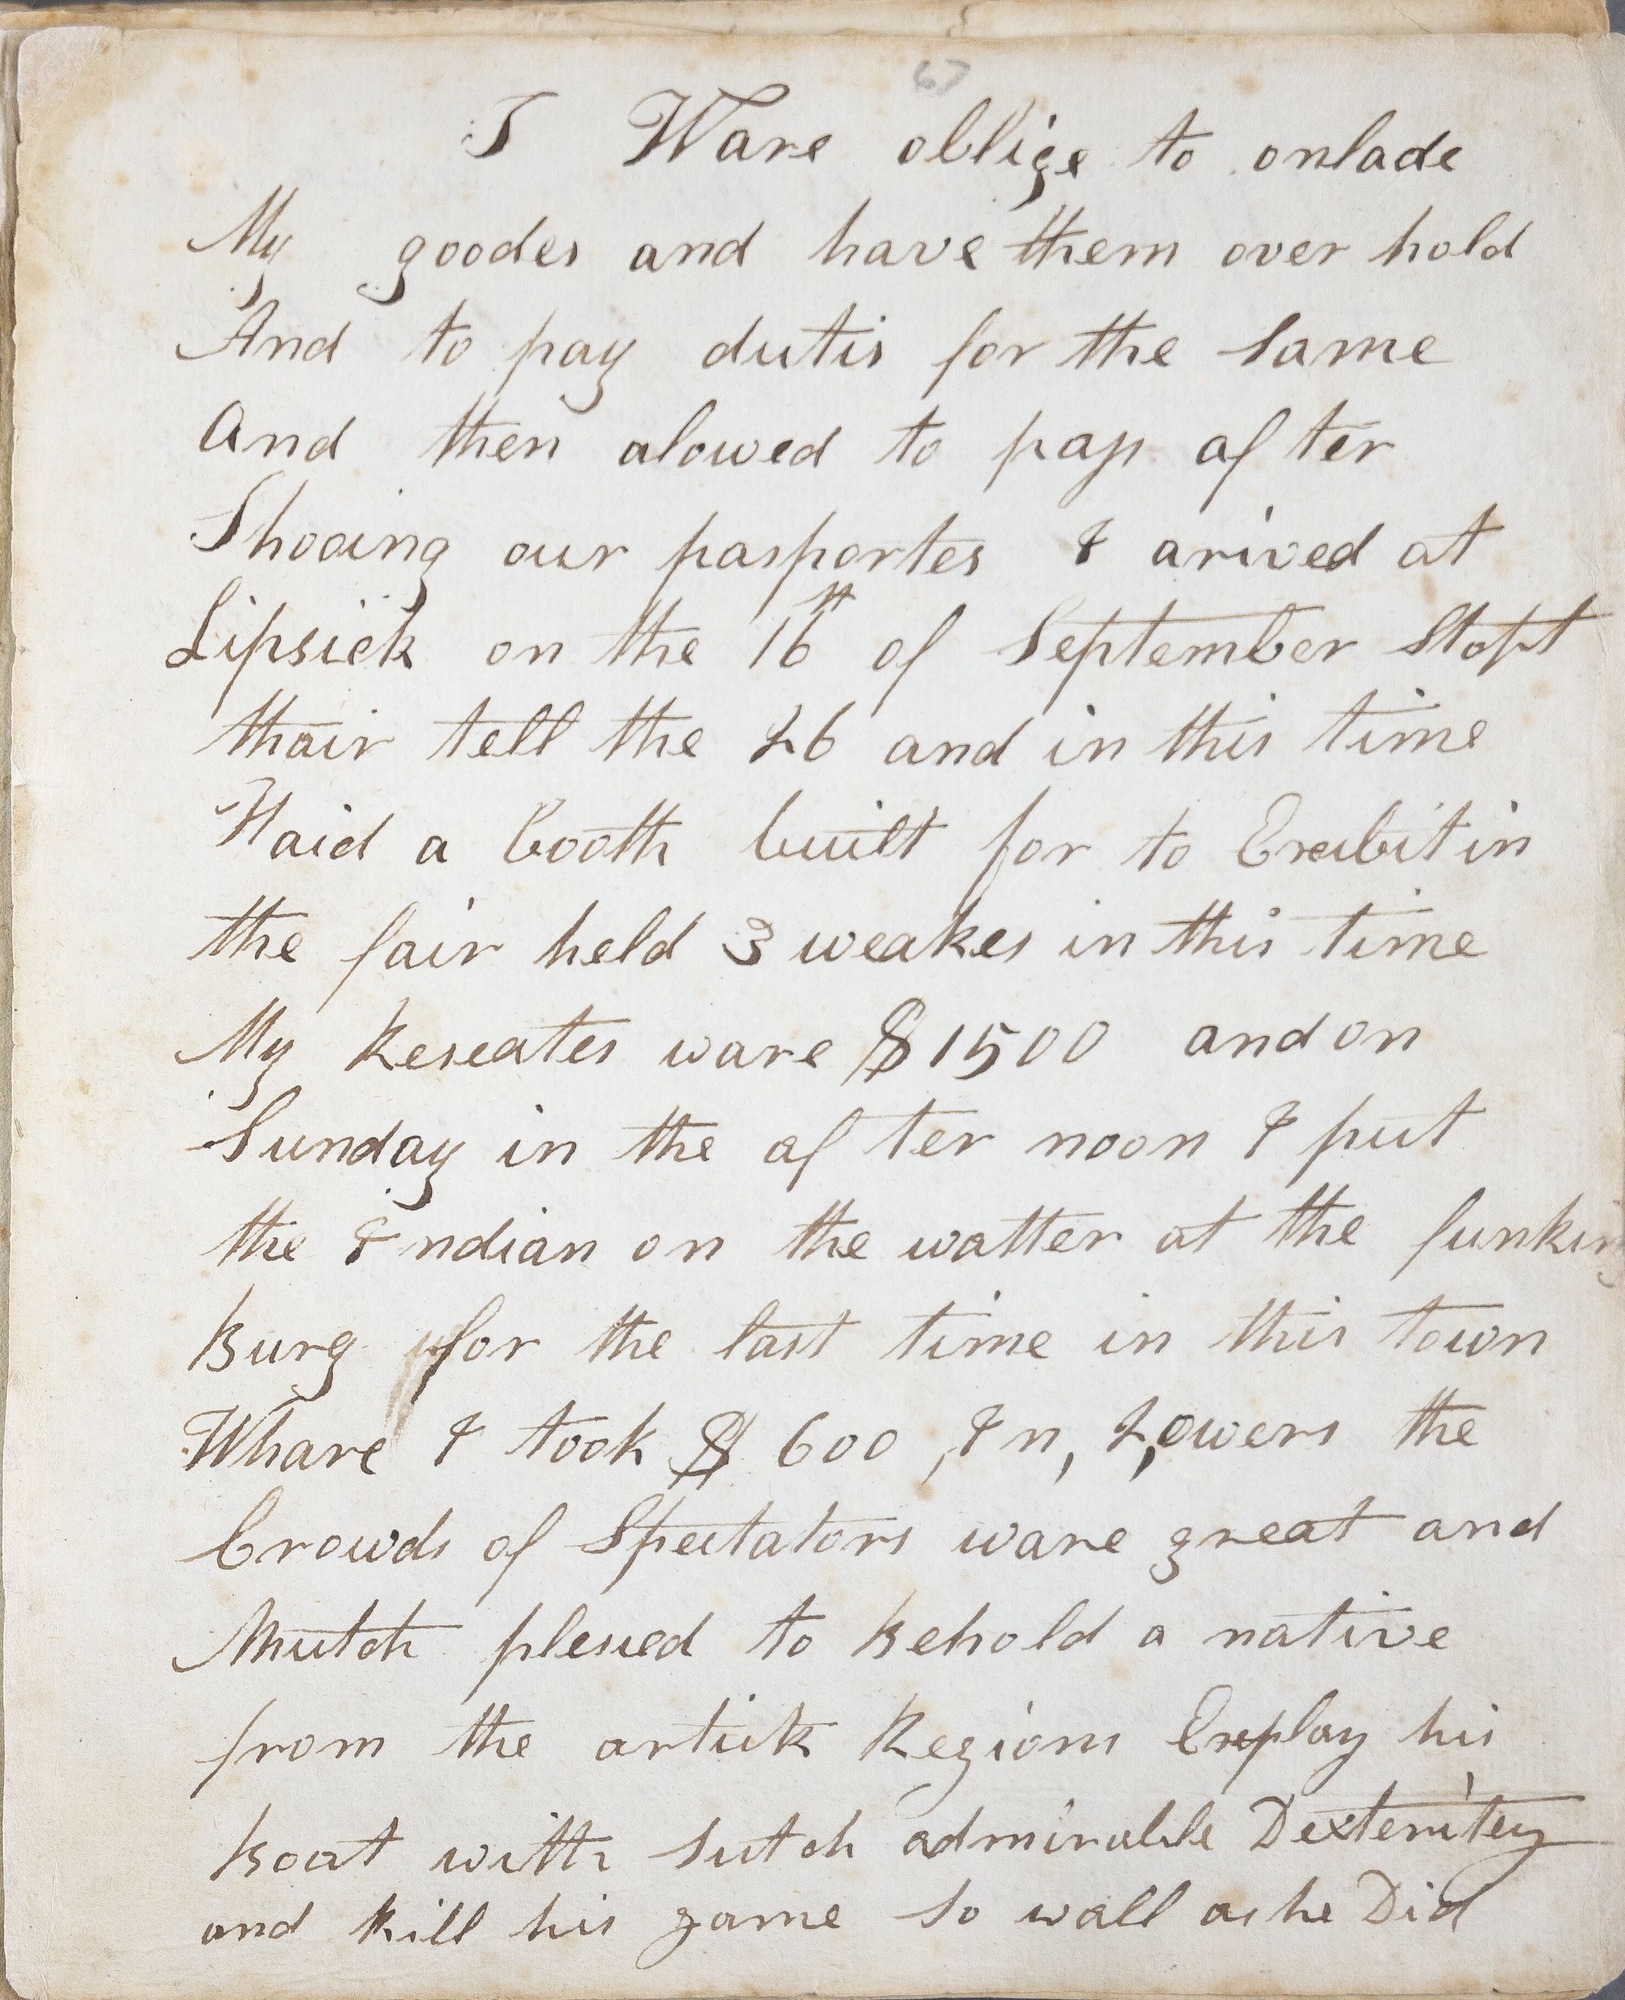 page of handwritten text